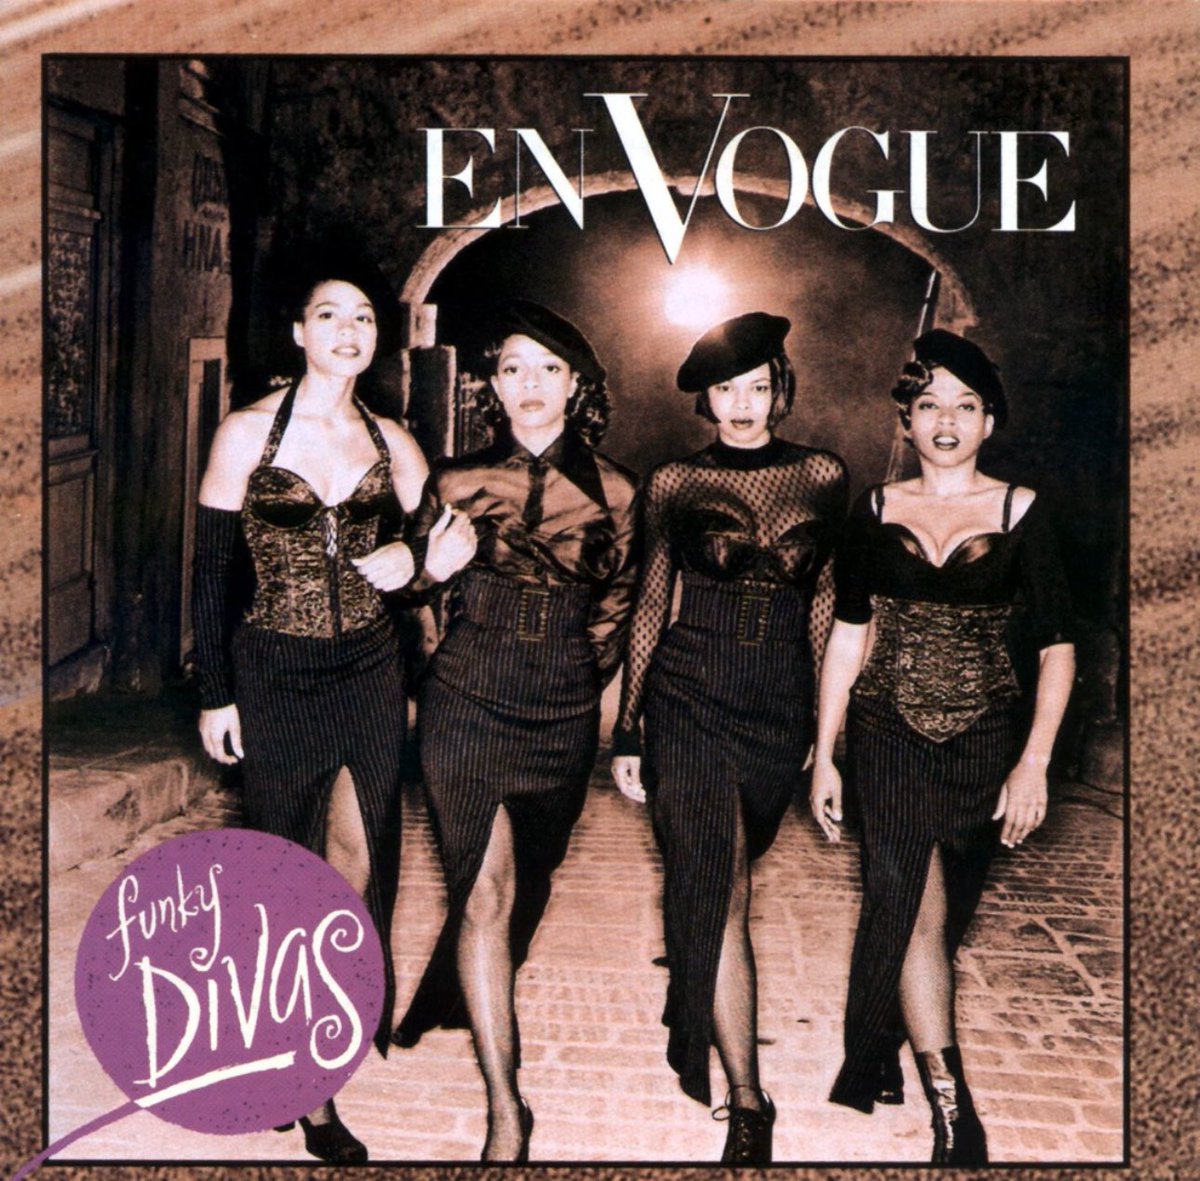 ❤️‍🔥🎶✨~Yesterday 
Song of the day by #EnVogue